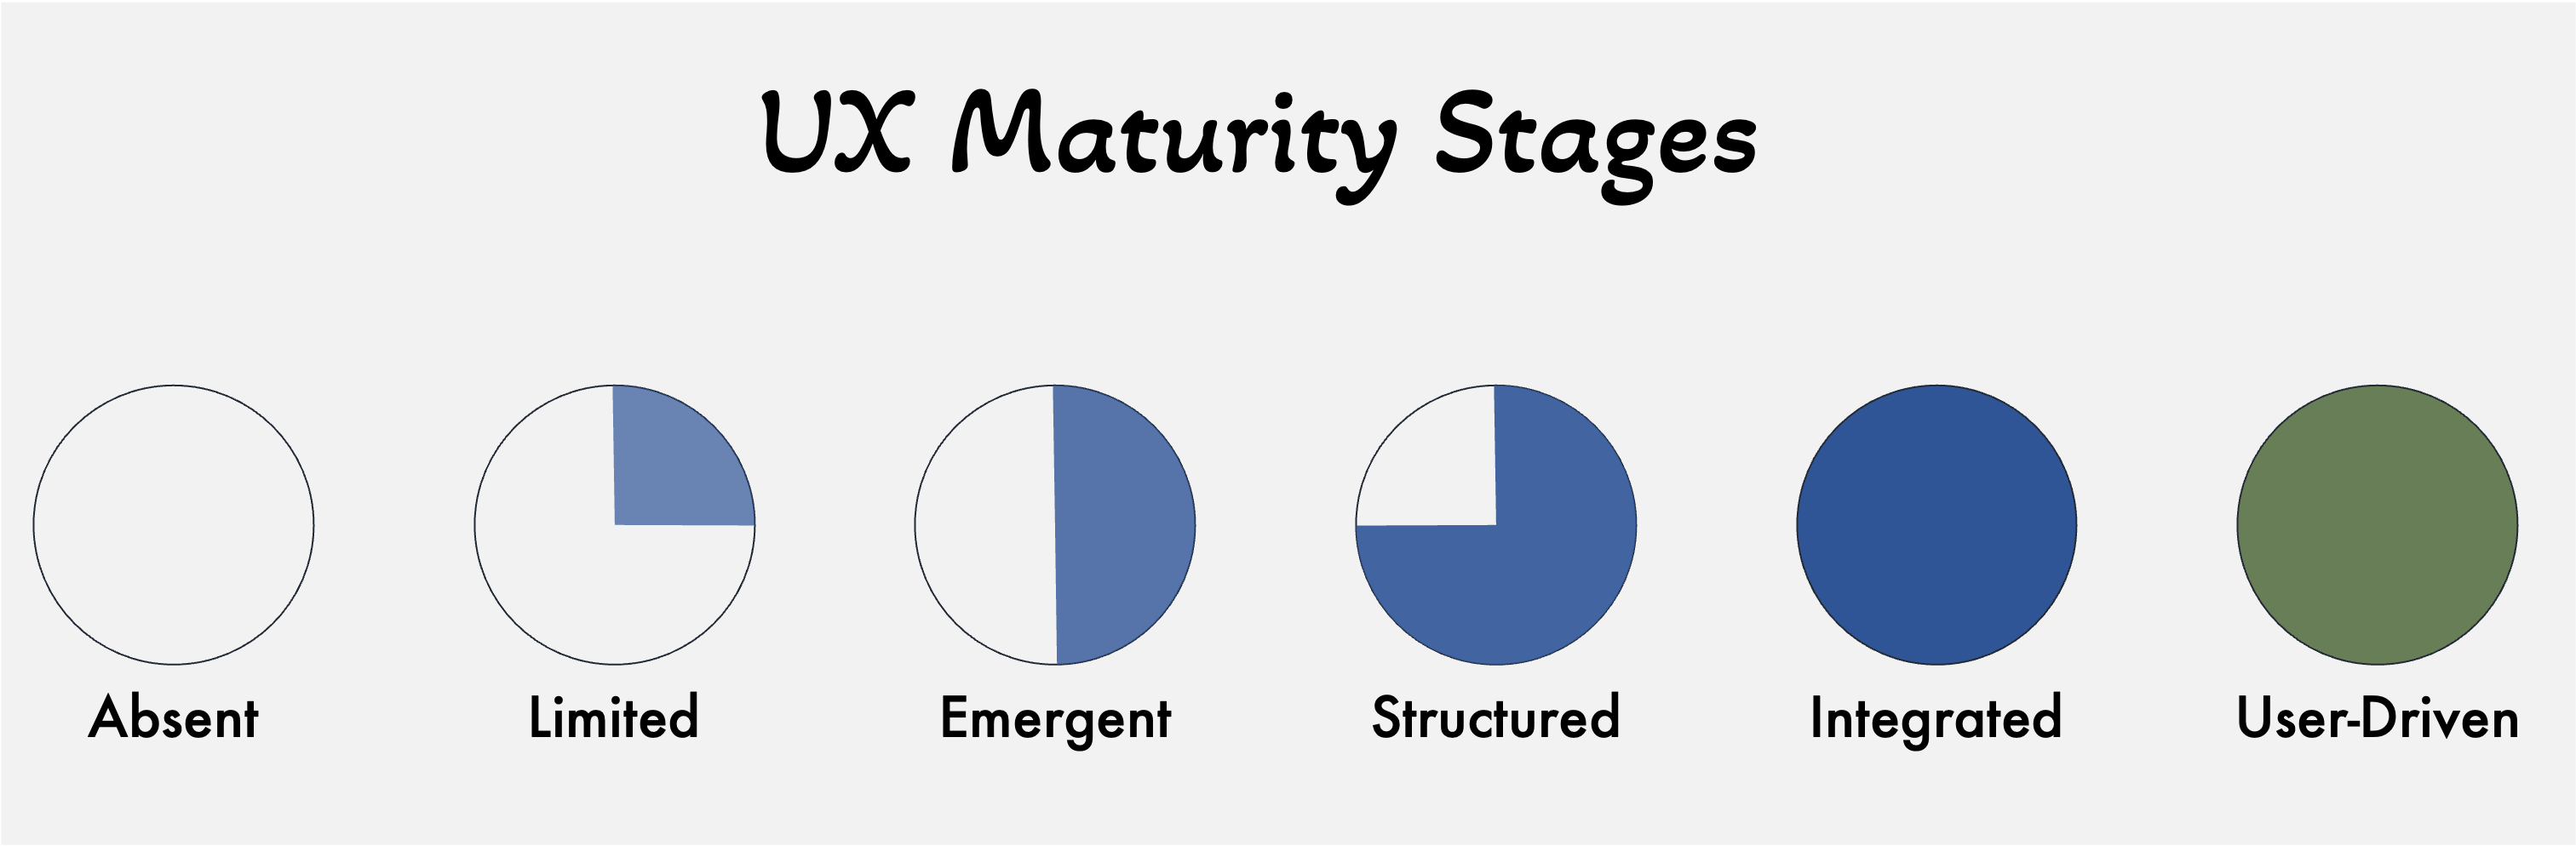 UX Maturity Stages